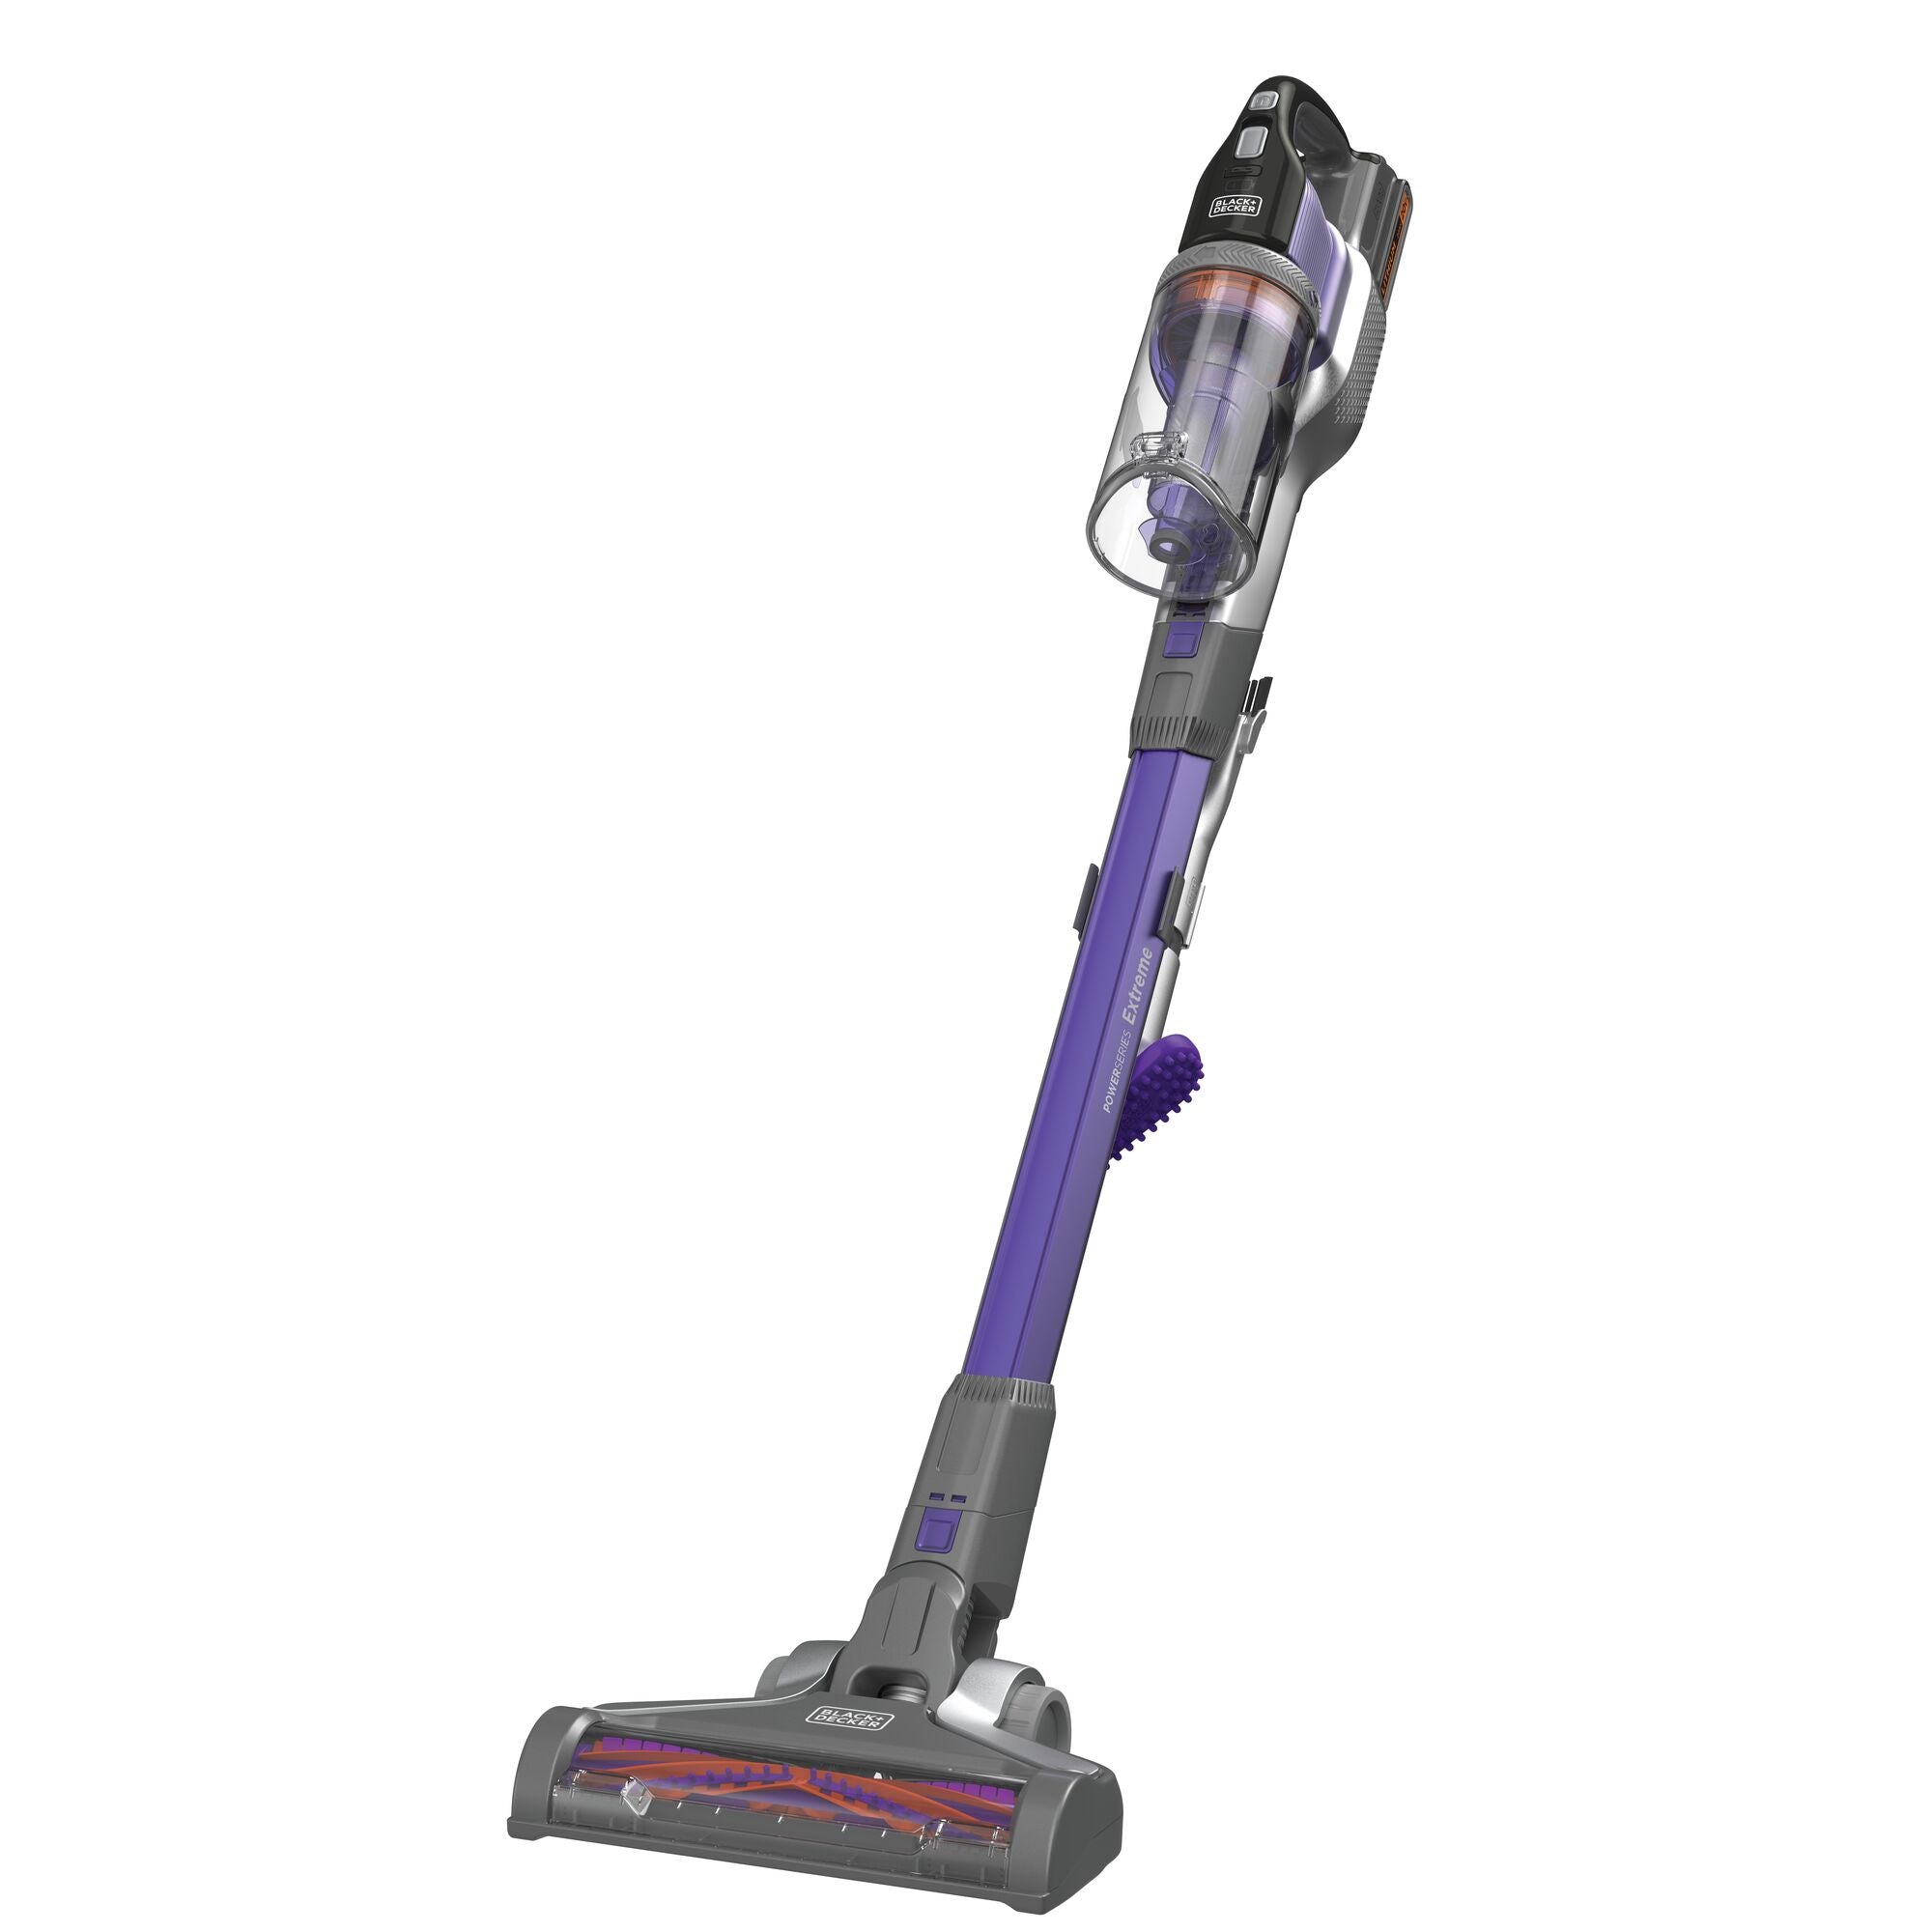 Review: The Black+Decker Powerseries Extreme Is an Affordable Dyson  Alternative